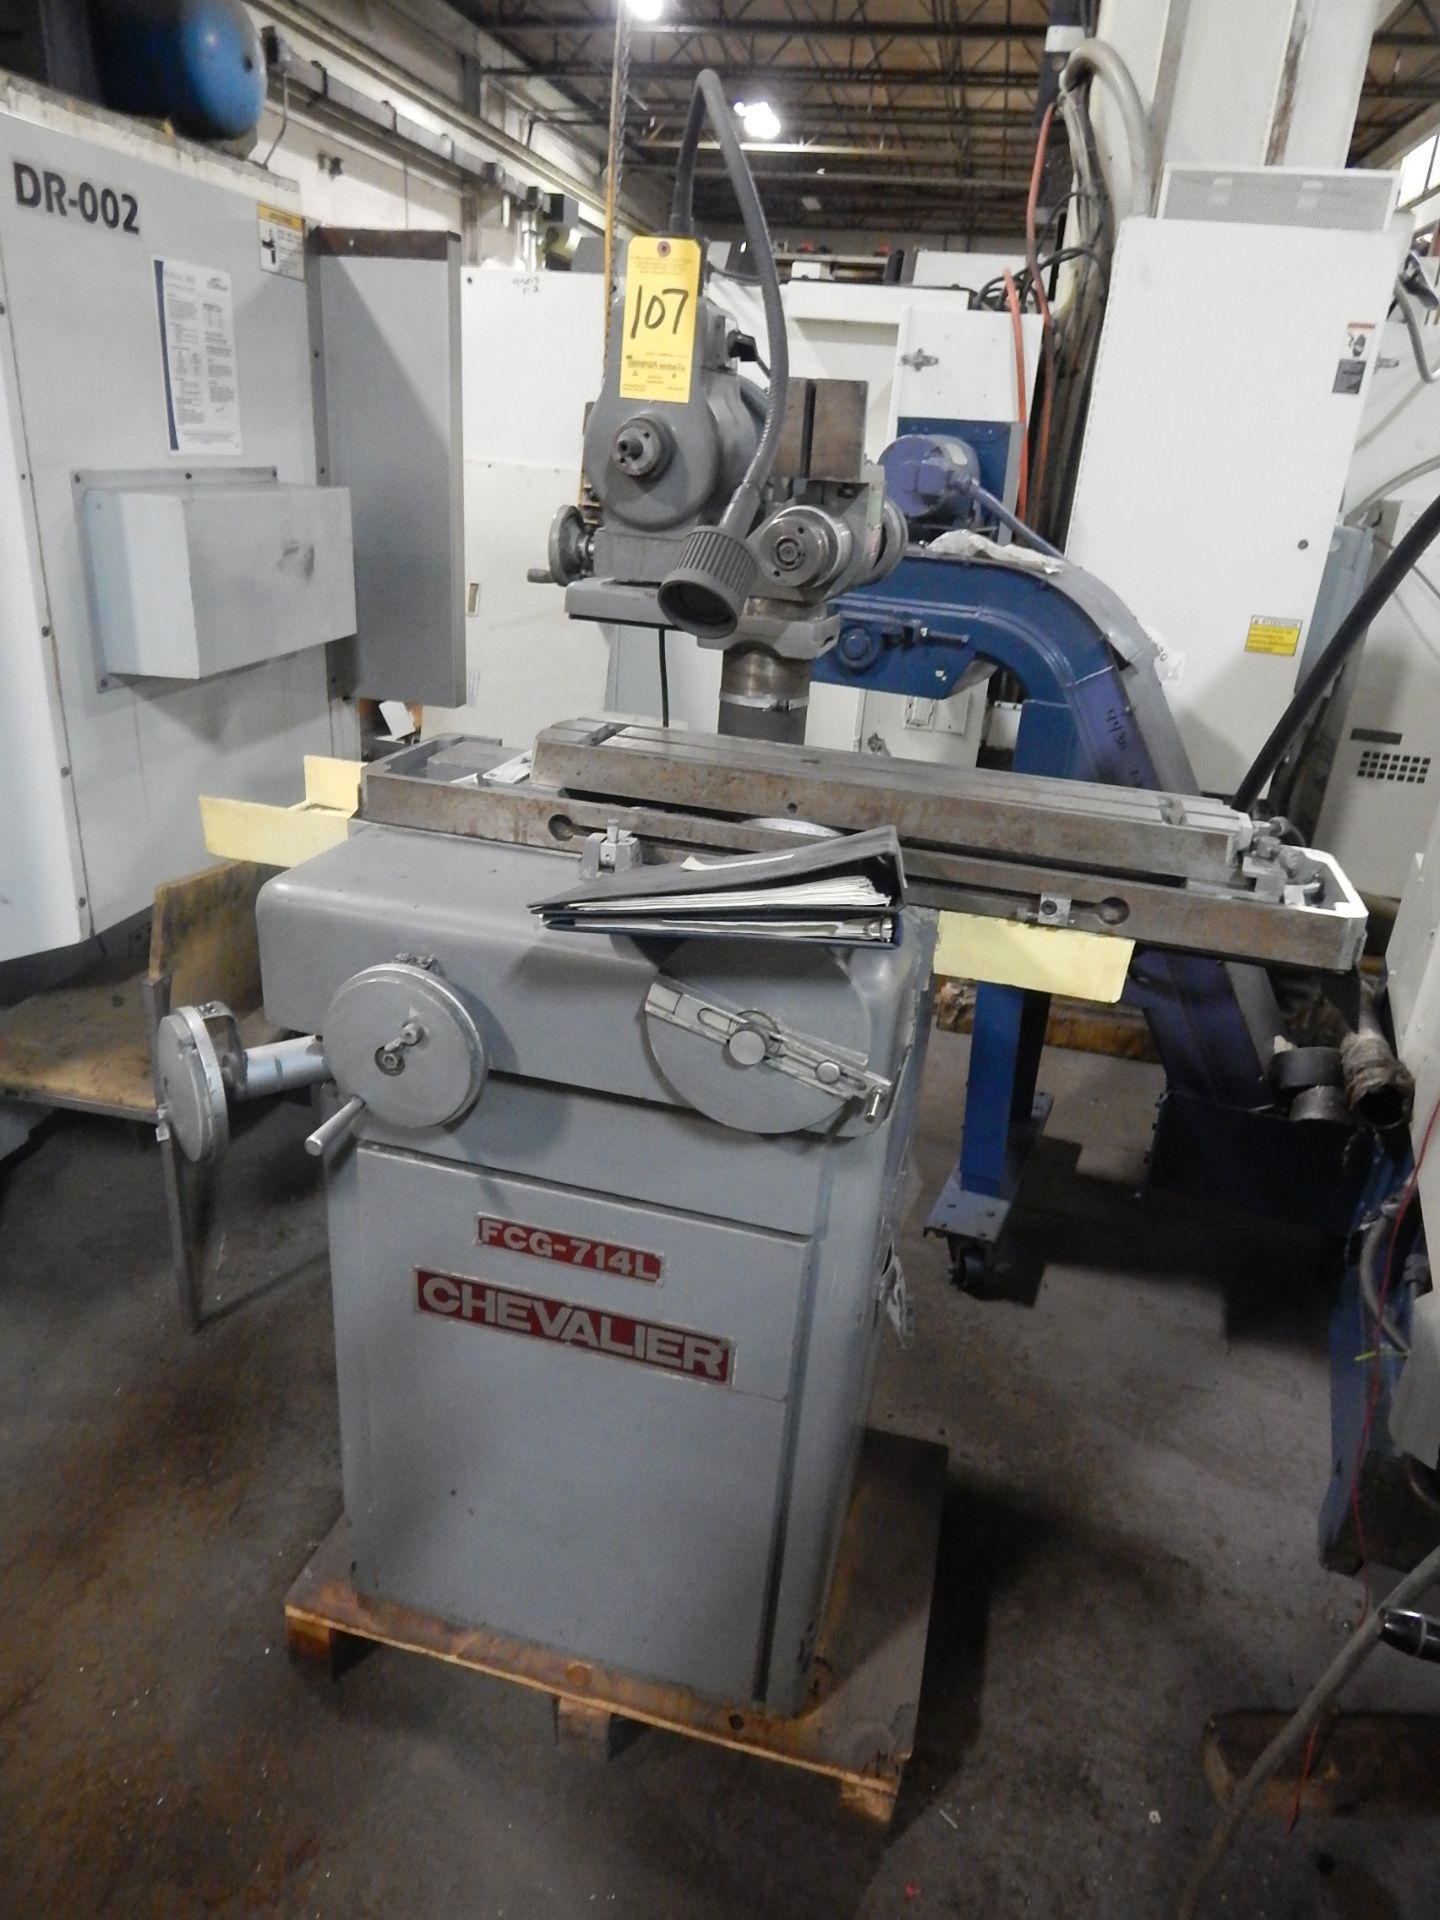 Chevalier FCG-714L Tool & Cutter Grinder, s/n 178-2002, Loading Fee $100.00 - Image 2 of 2